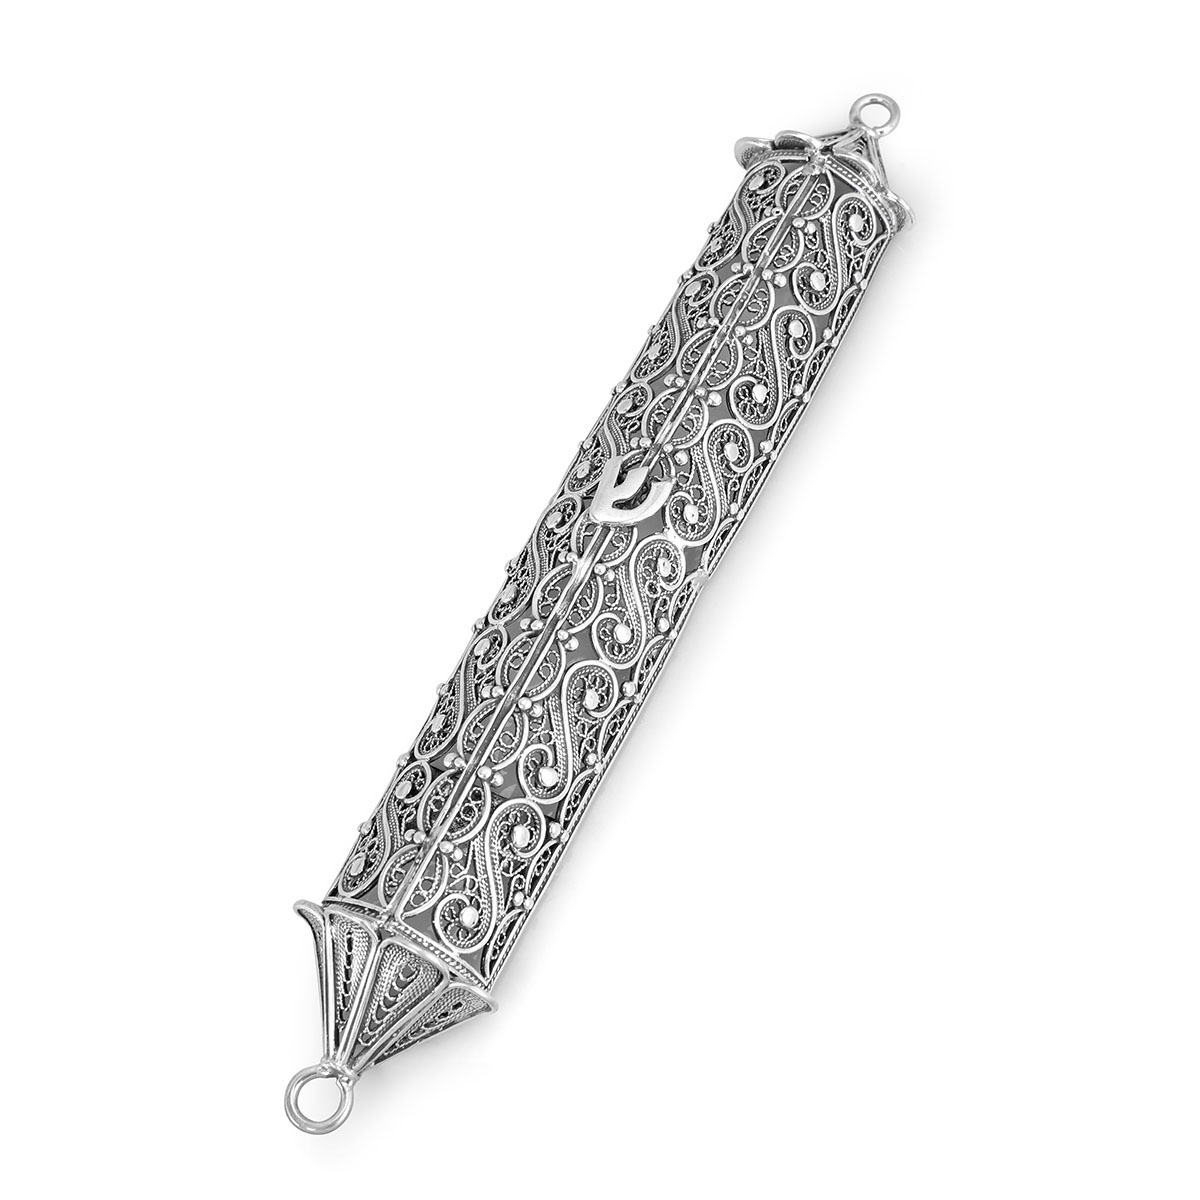 Traditional Yemenite Art Large Handcrafted Sterling Silver Mezuzah Case With Filigree Design - 1